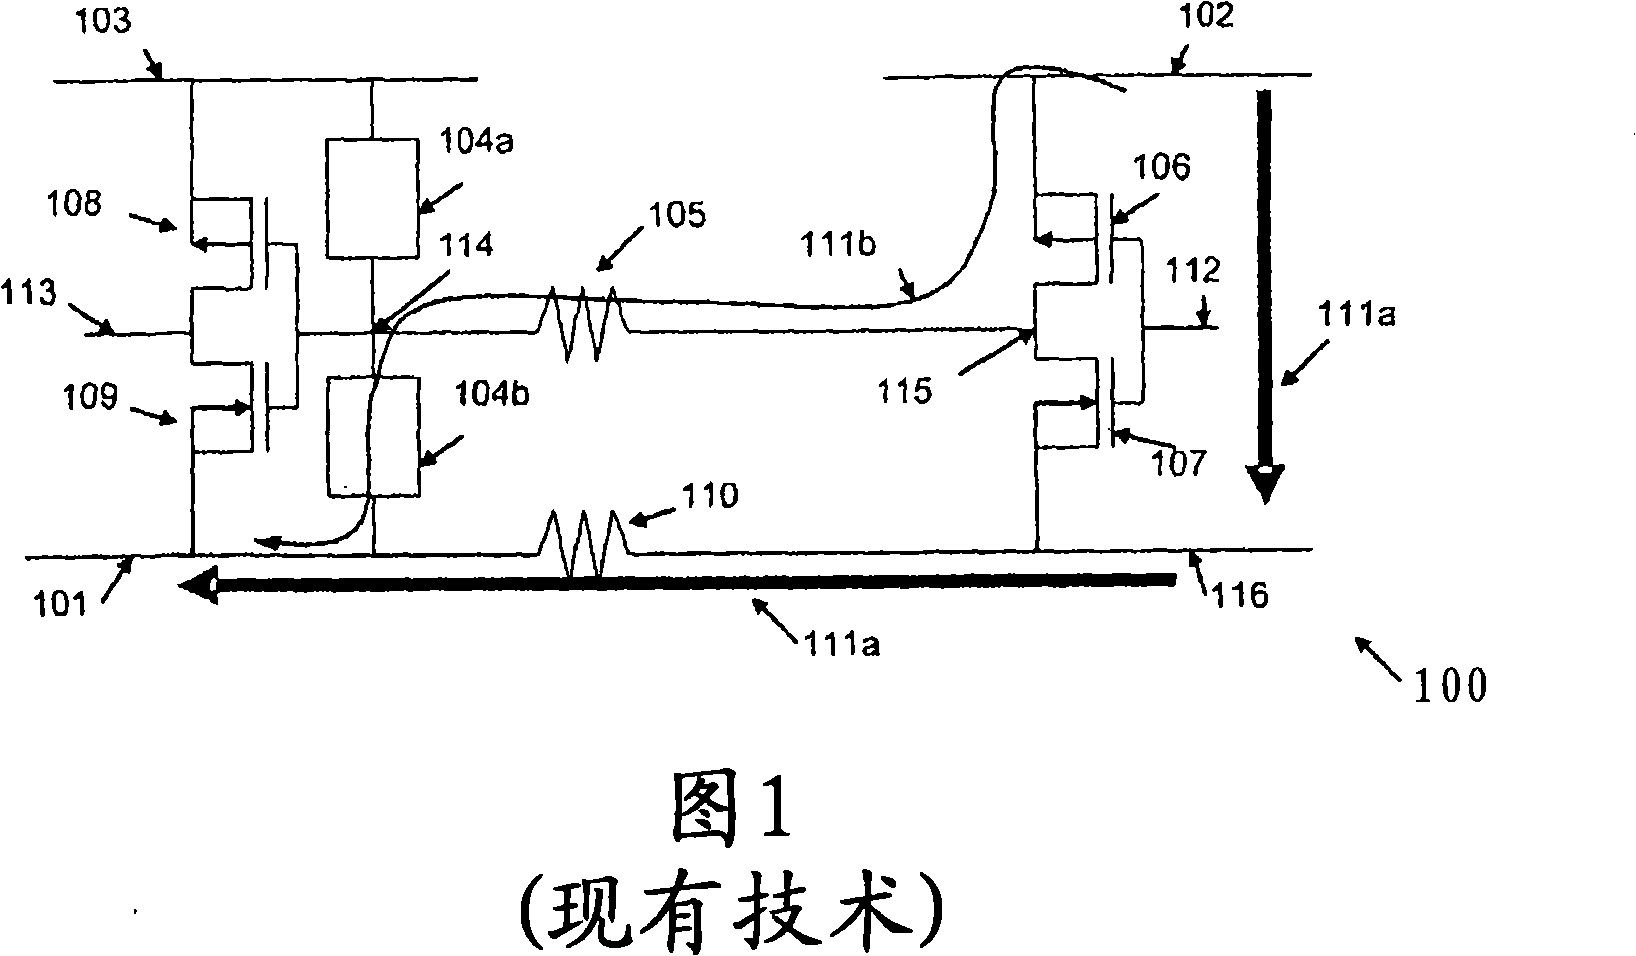 Method and aparatus for improved electrostatic discharge protection